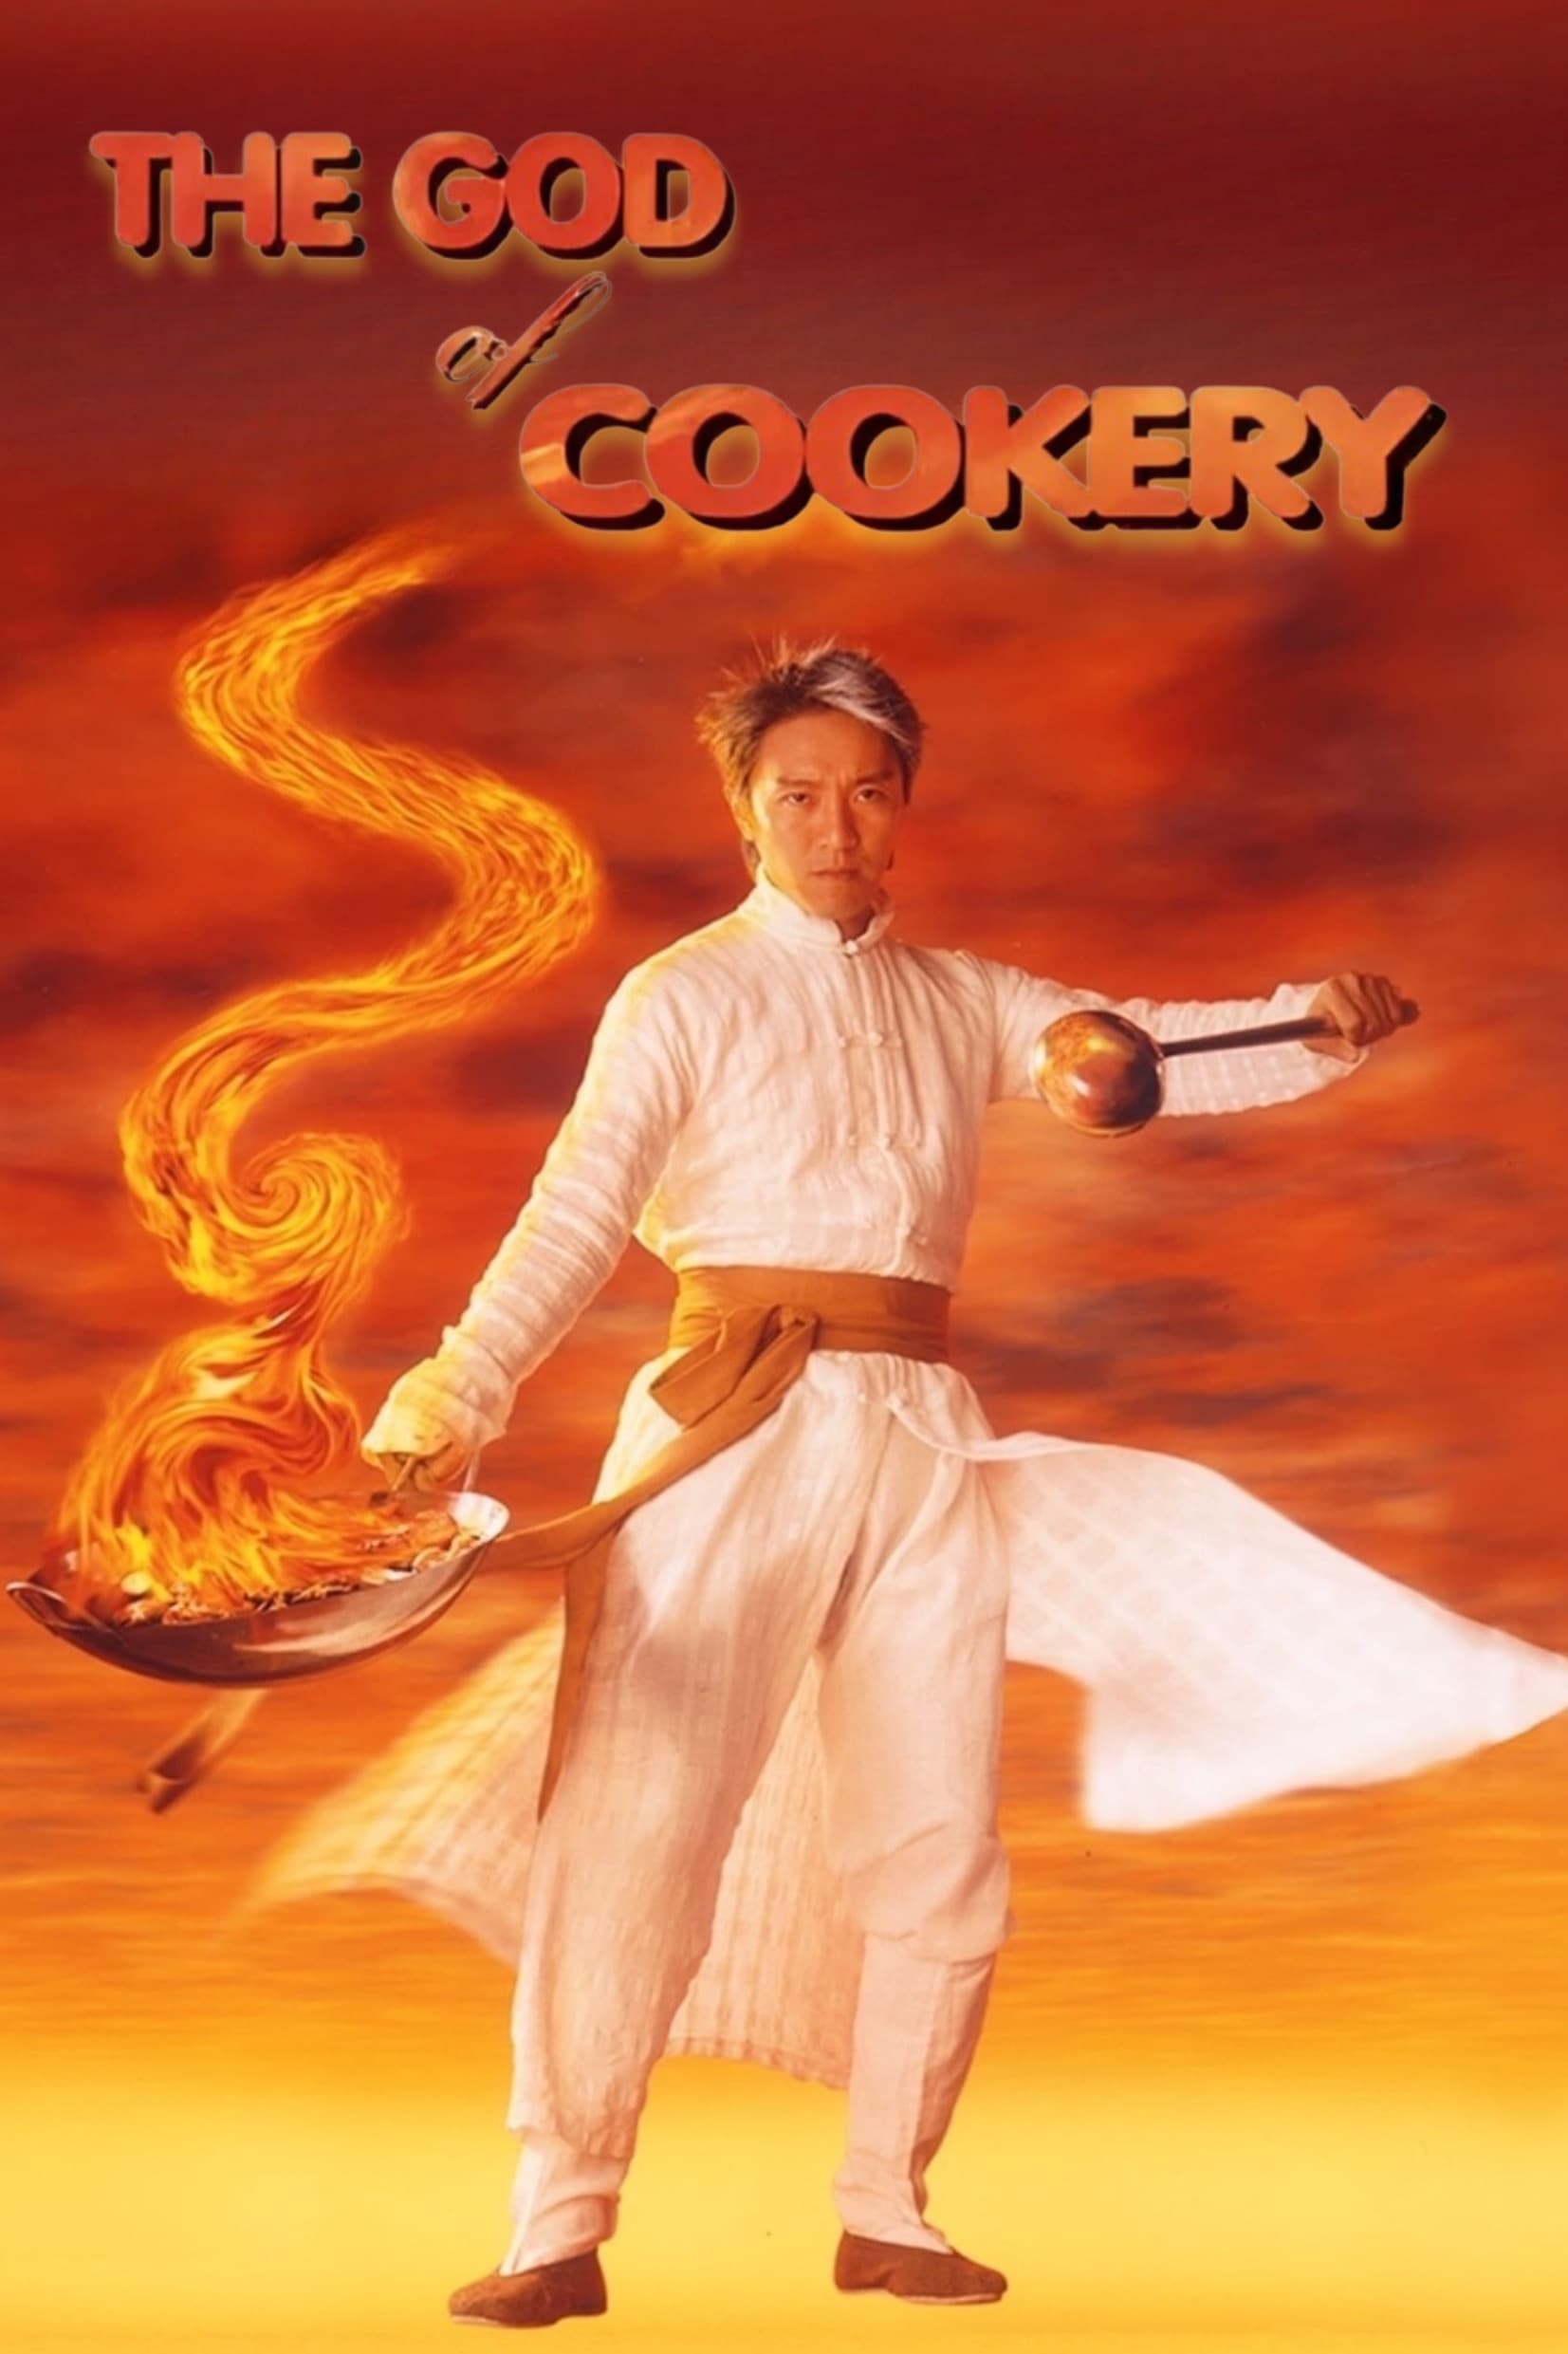 The God of Cookery (1996)